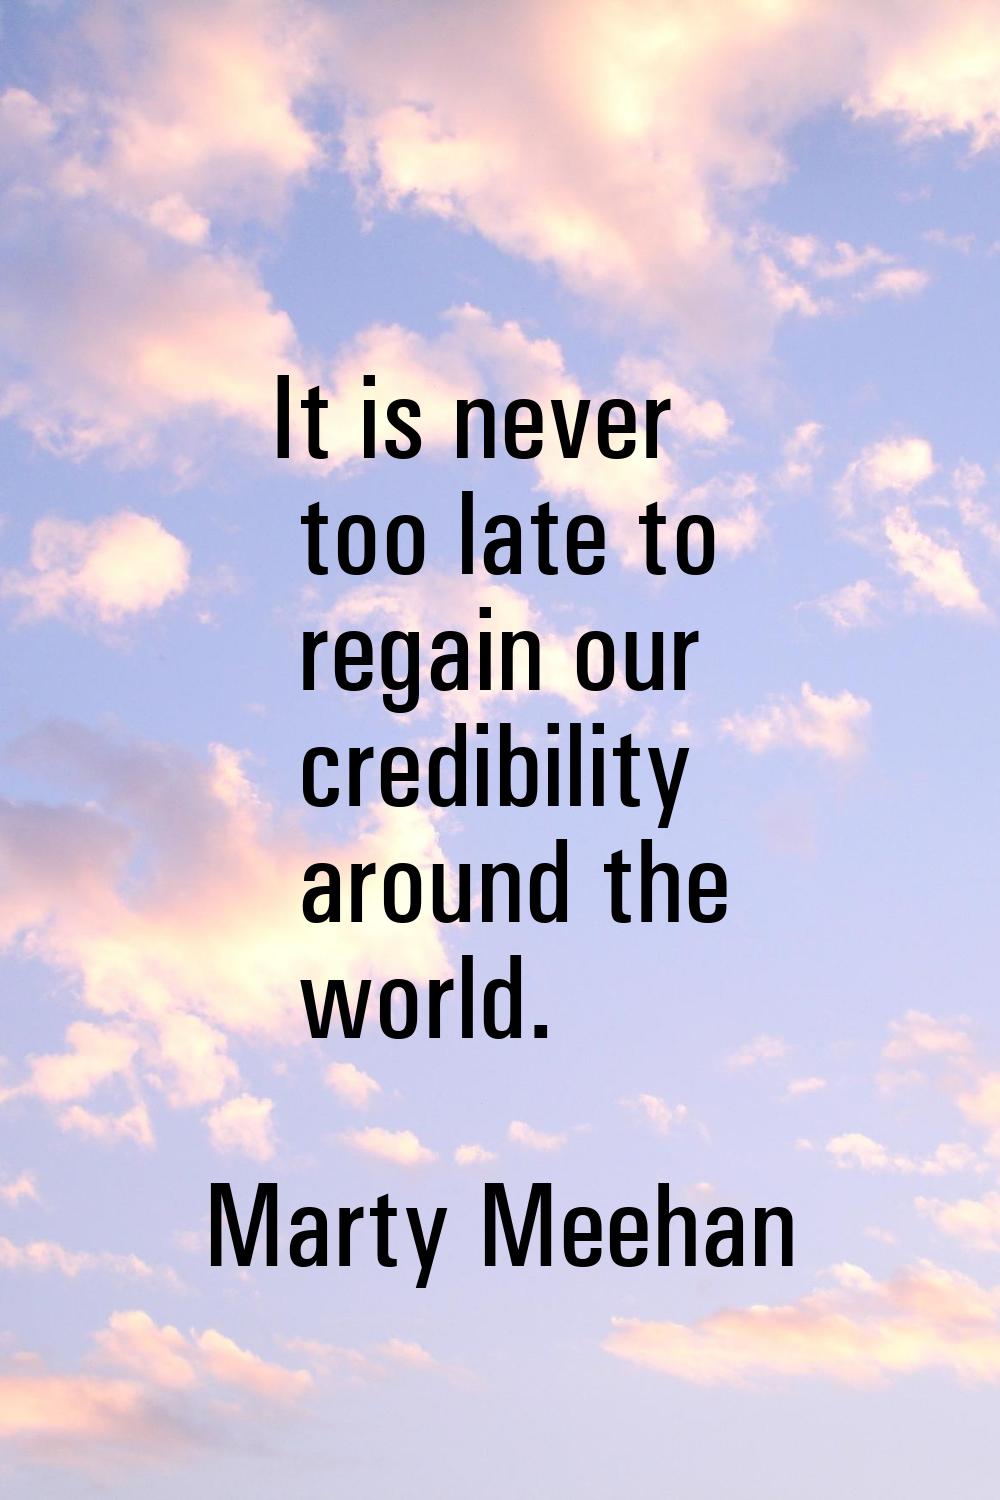 It is never too late to regain our credibility around the world.